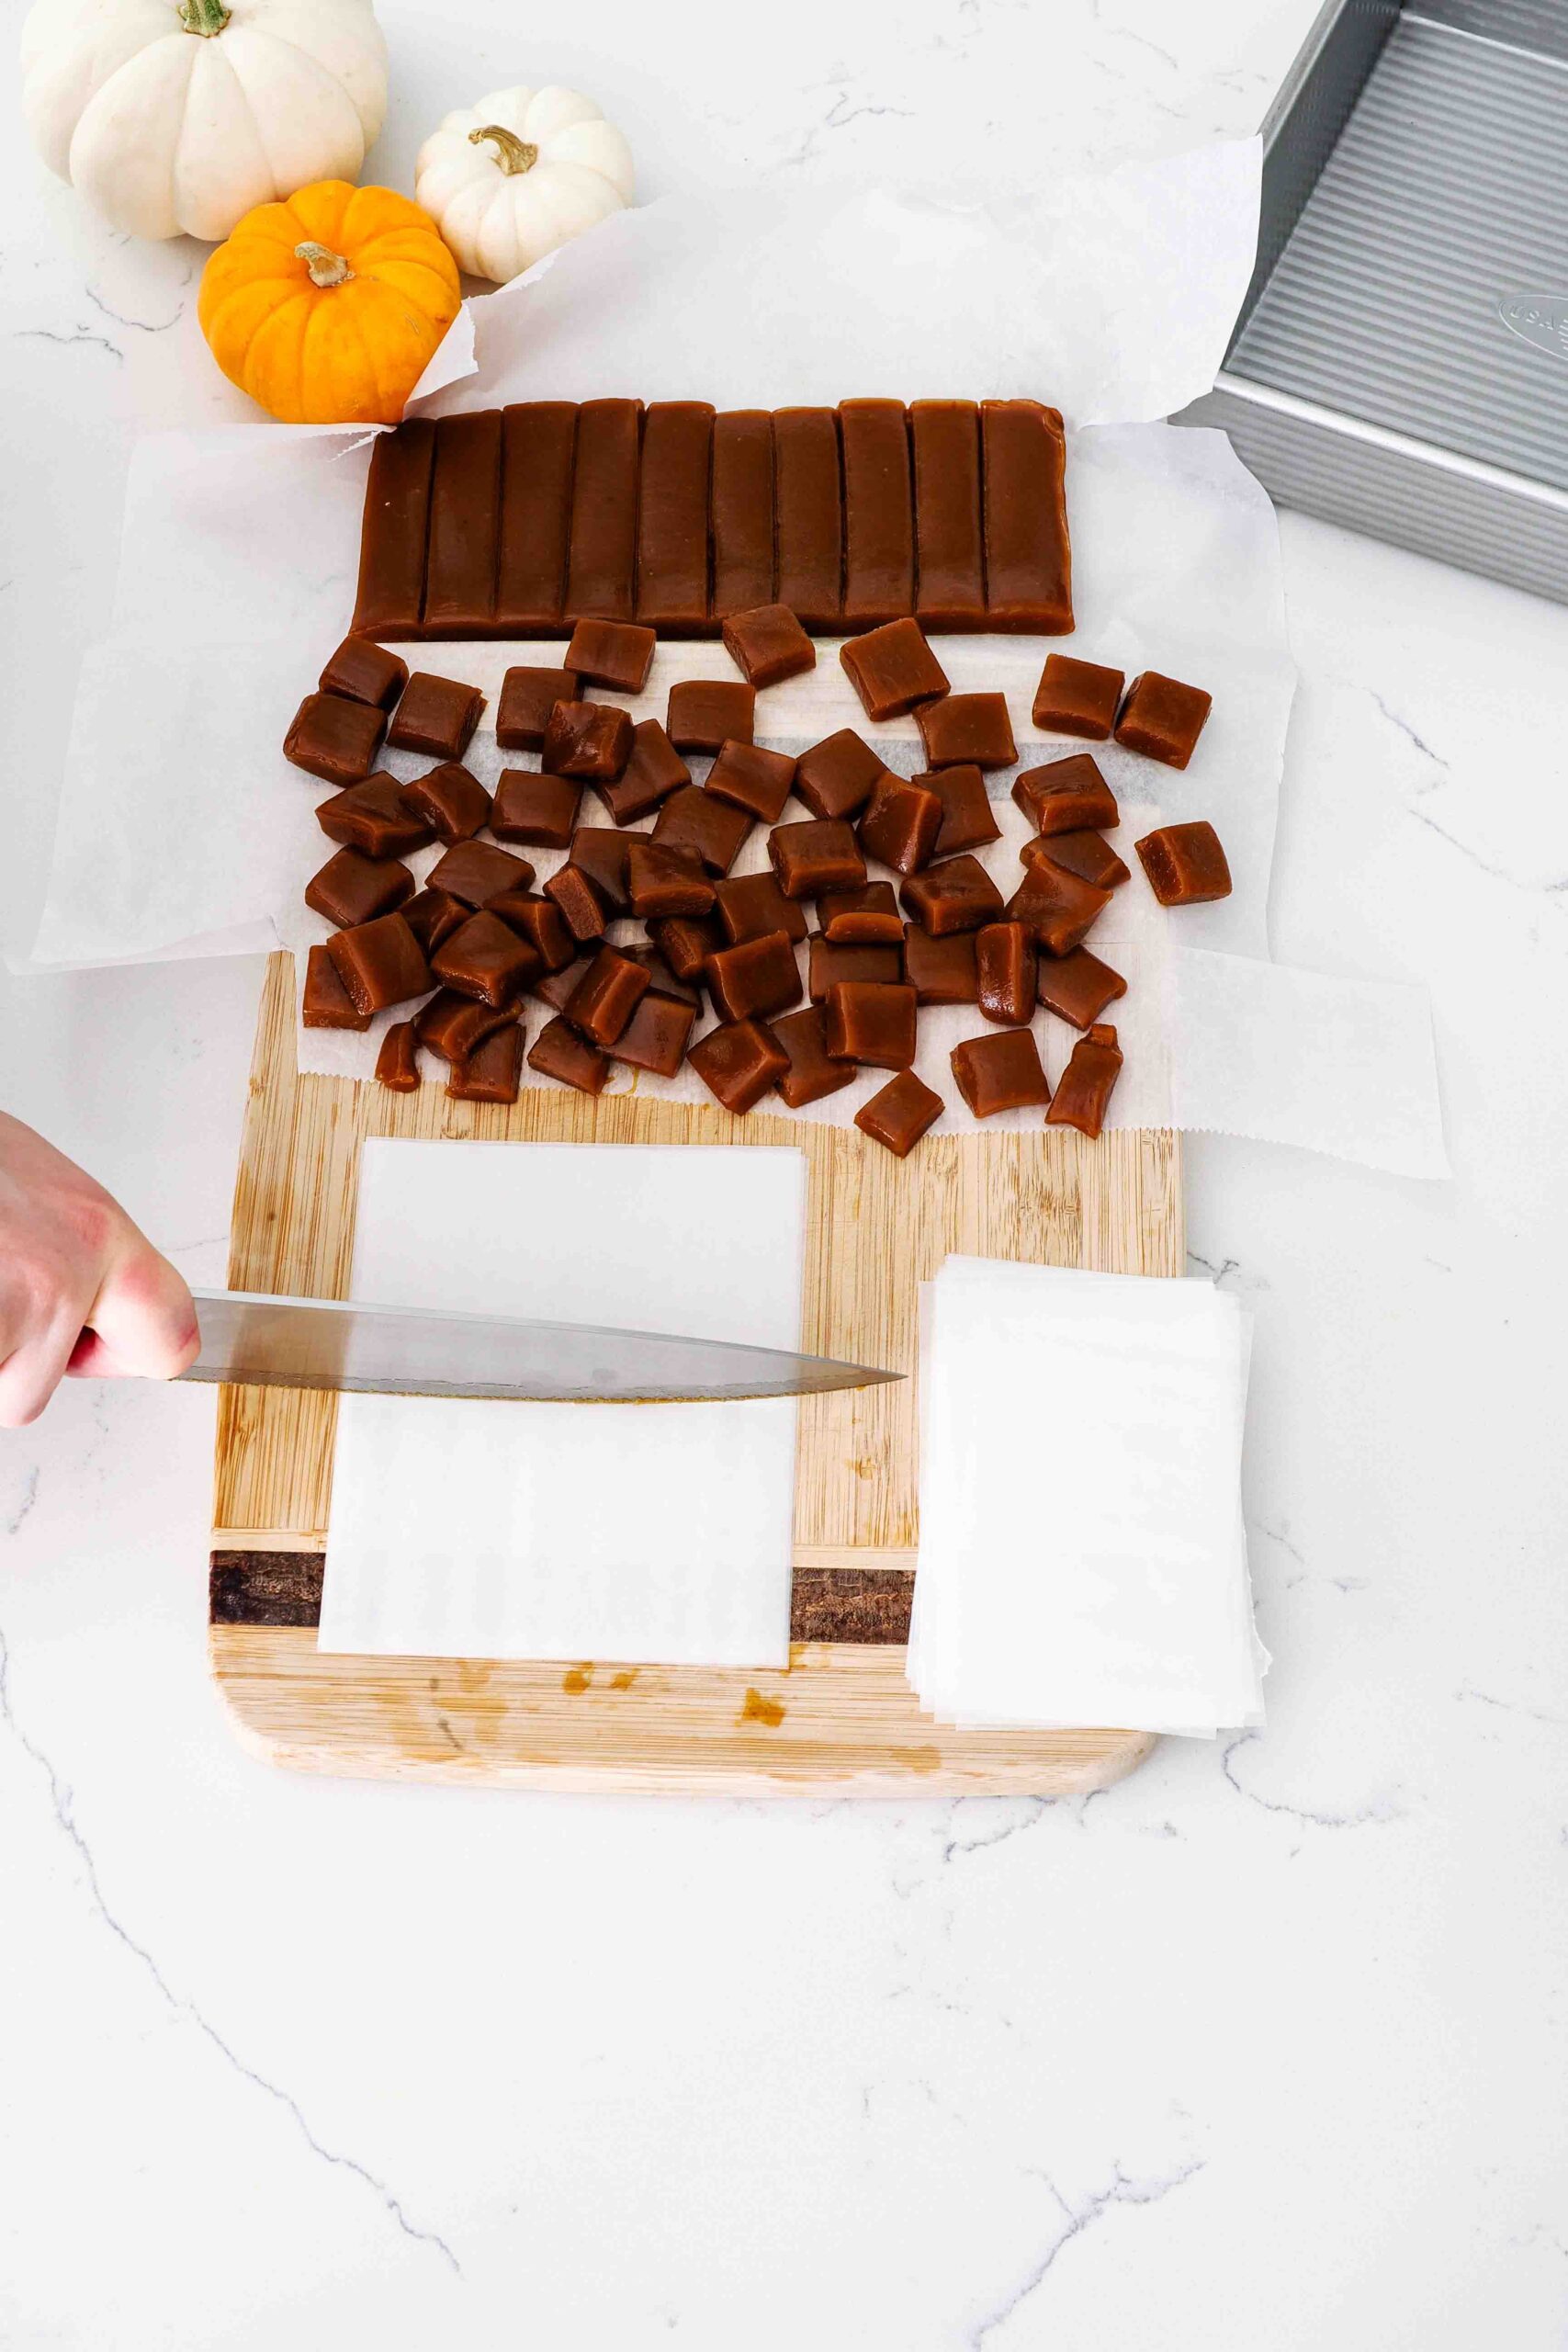 A knife cuts pre-cut wax paper pieces in half on a cutting board with caramels.